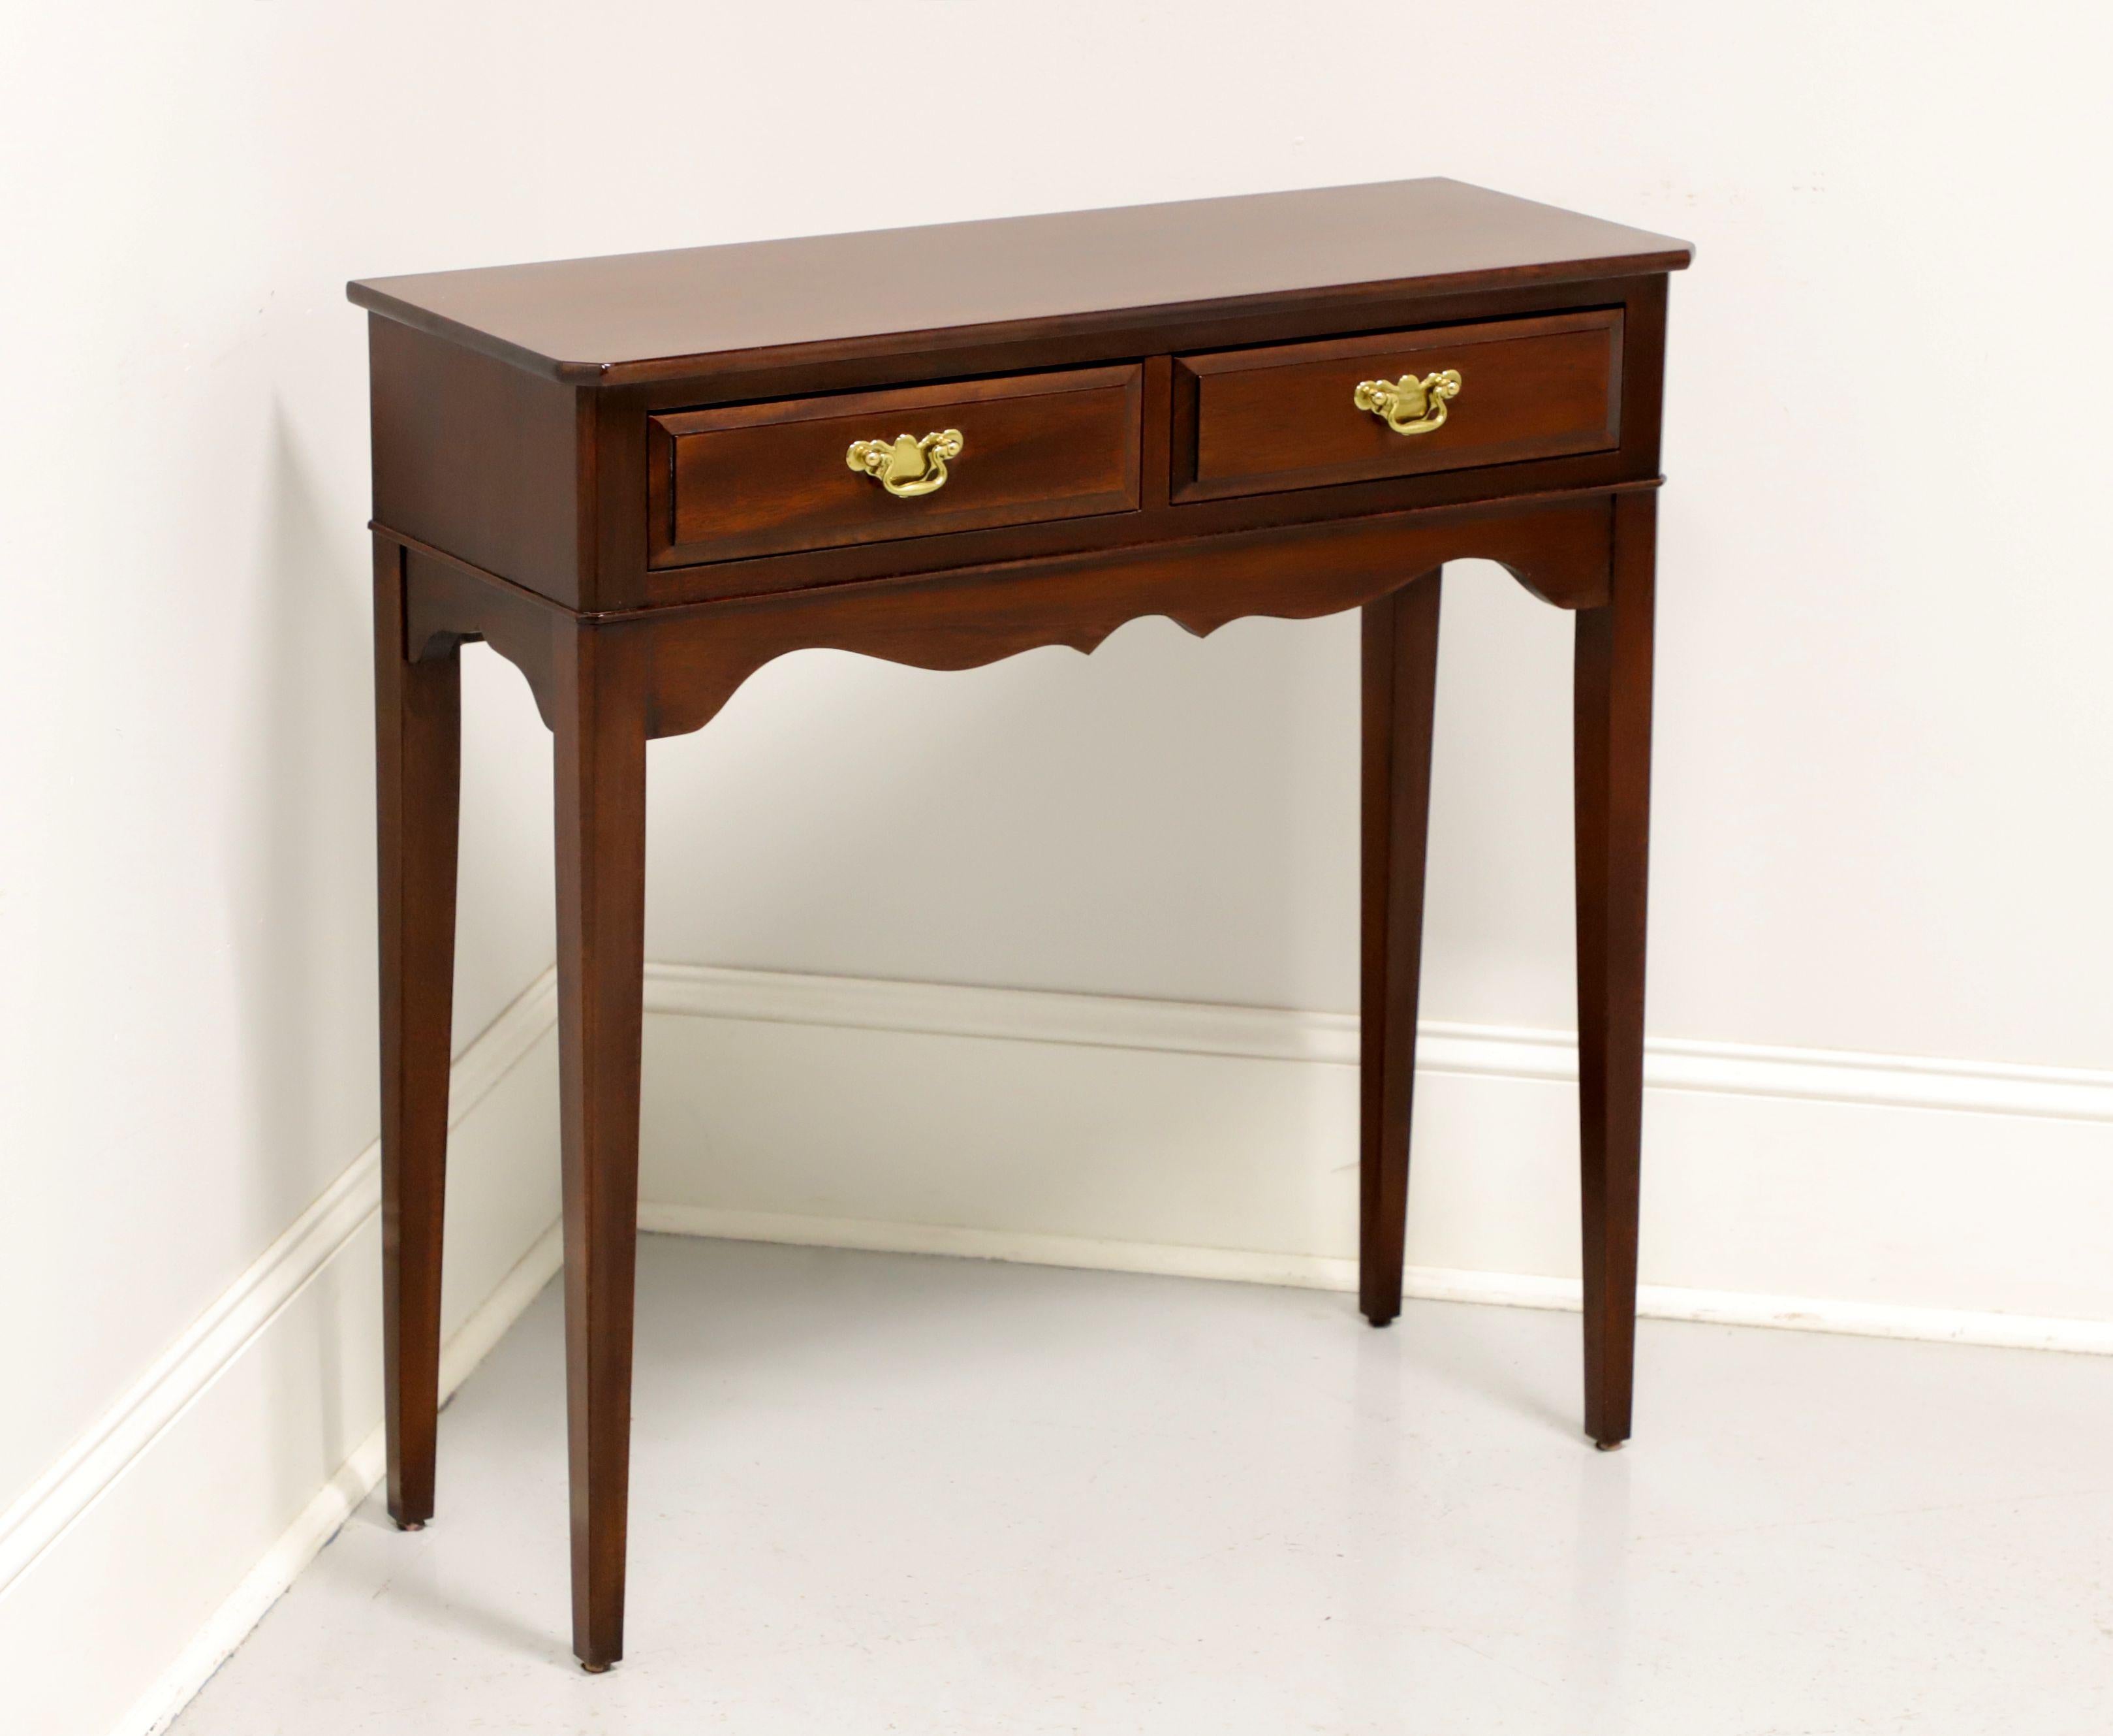 20th Century MADISON SQUARE Mahogany Traditional Small Console Table - A